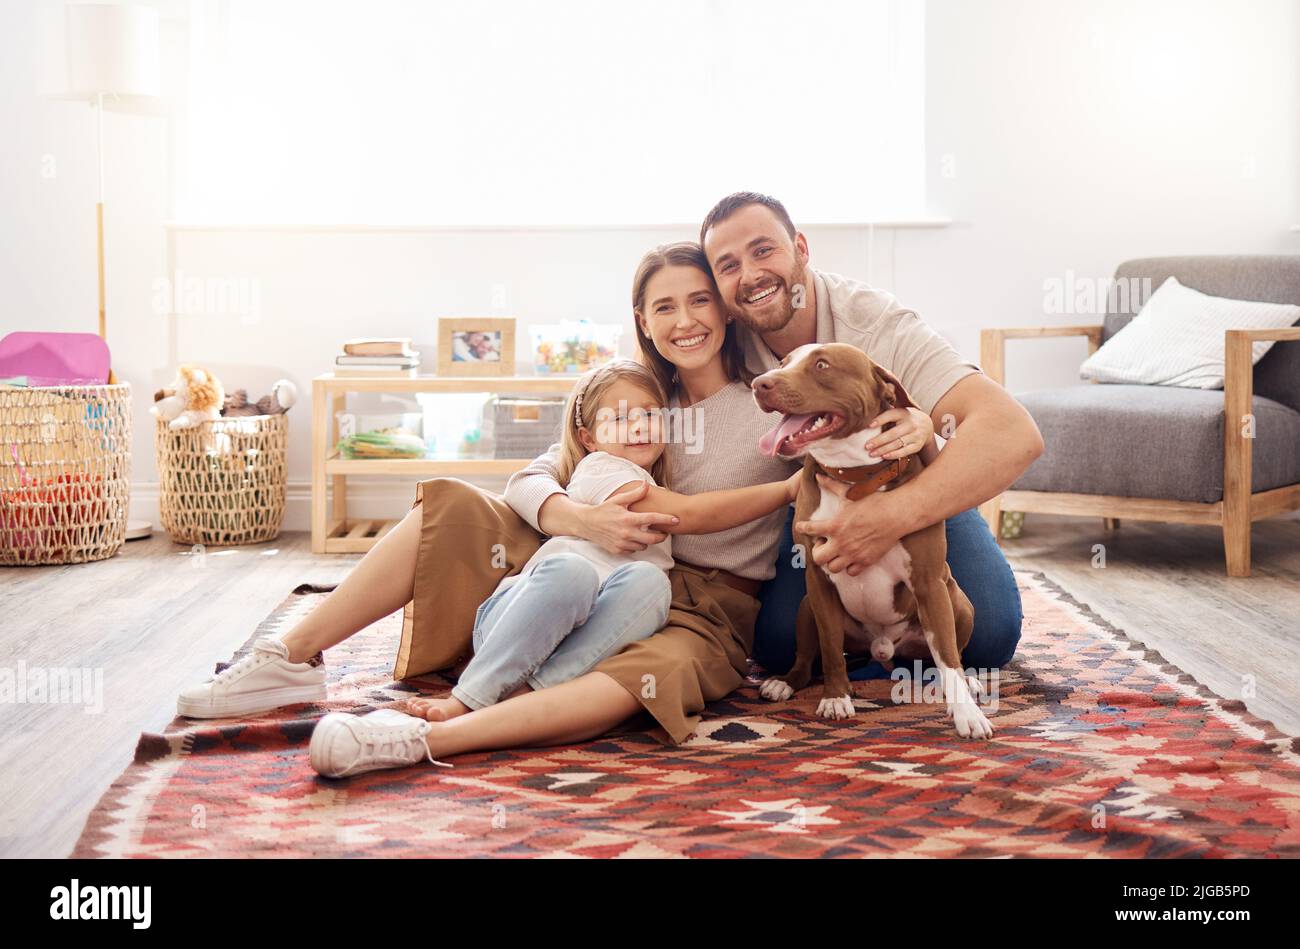 All we need is each other. Full length shot of a young family sitting with their dog on the living room floor at home. Stock Photo